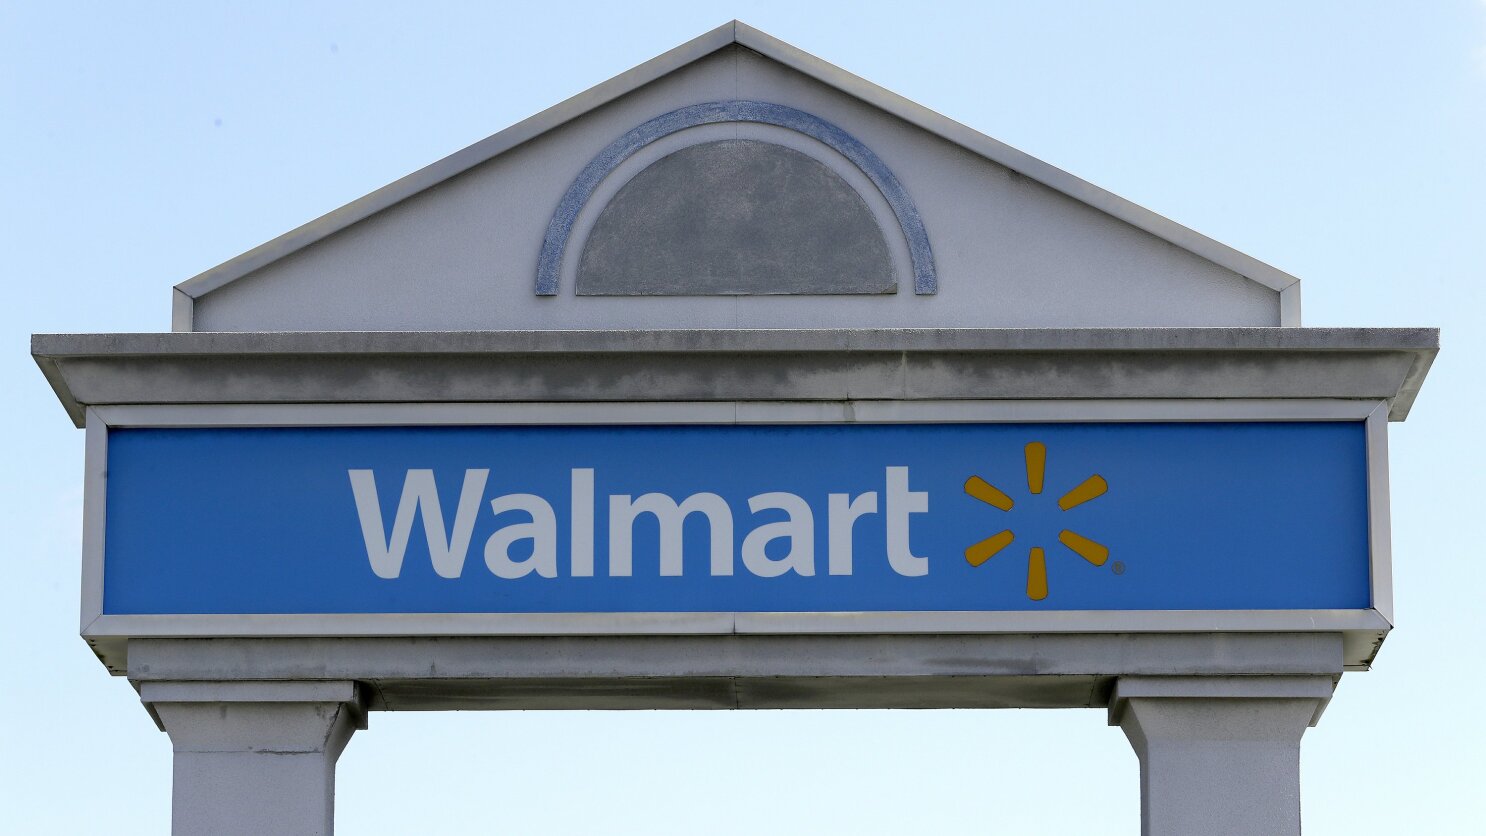 Walmart stops advertising on X, joining a growing list of companies